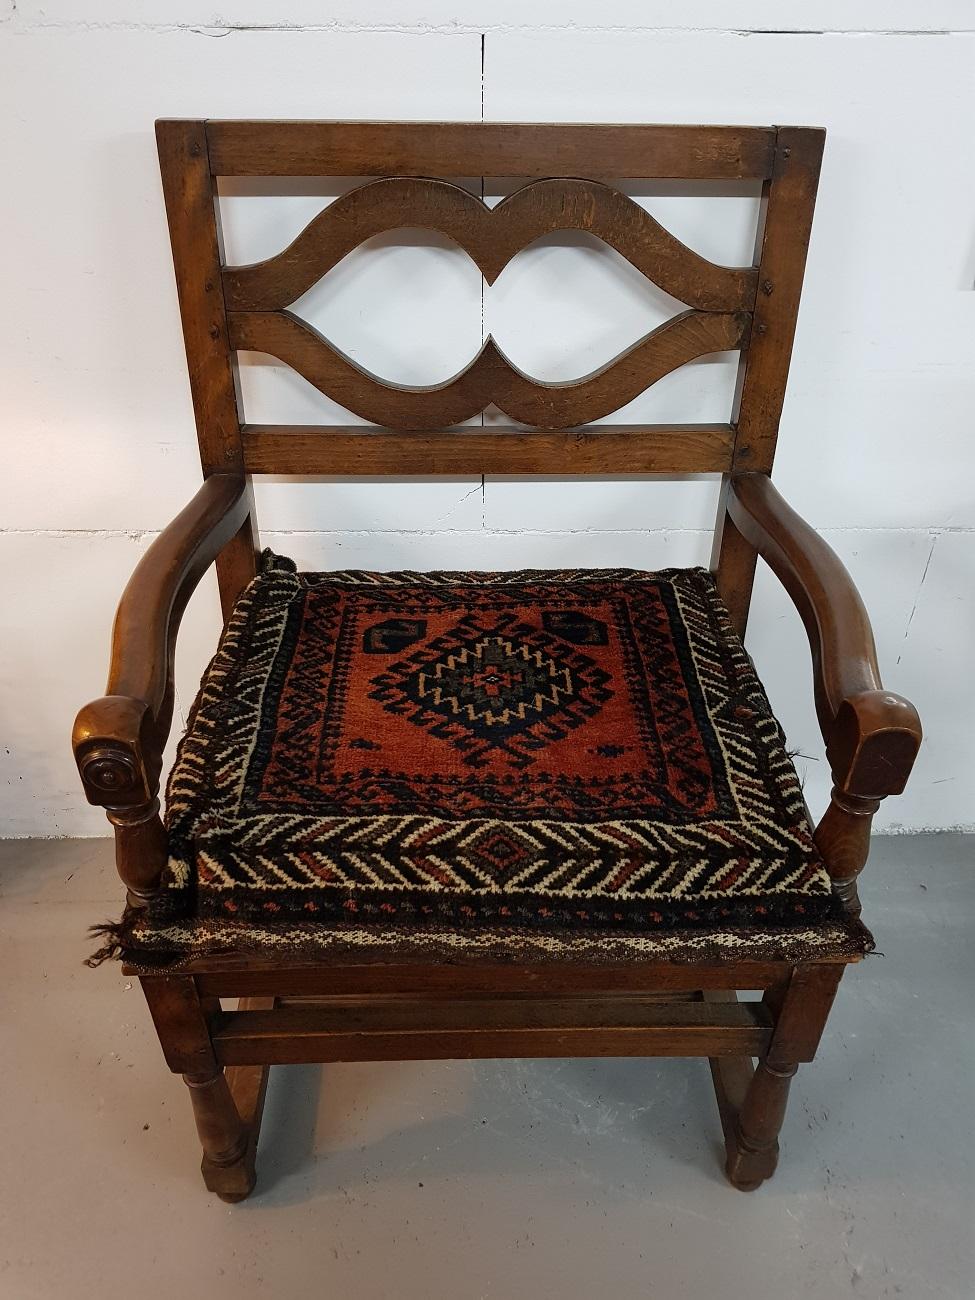 Beautiful minimalist designed English oak armchair from the 19th century with an open back and the legs connected with a stretcher, with a persian wool pillow from the 20th century.

The measurements are,
Depth 54 cm/ 21.2 inch.
Width 65 cm/ 25.5